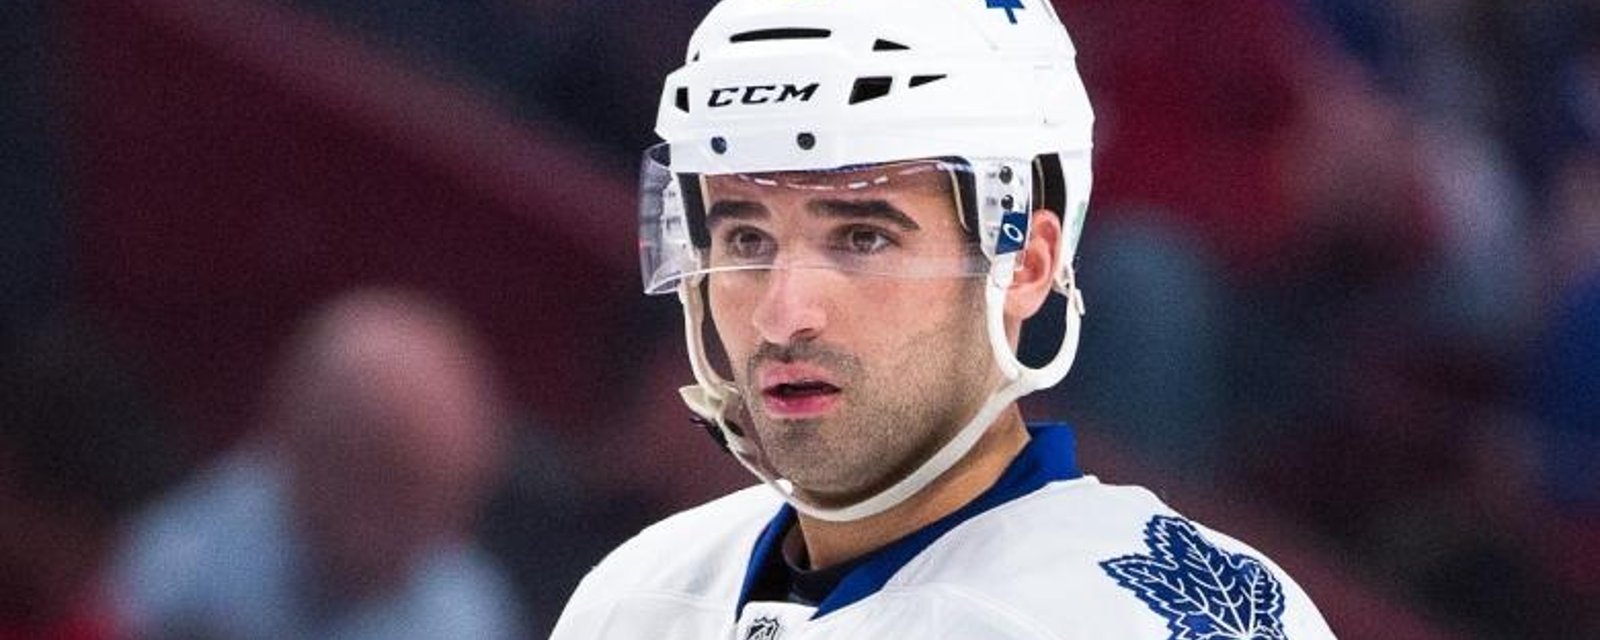 Kadri gets slashed twice, and mauled after clean hit, receives a penalty for it.